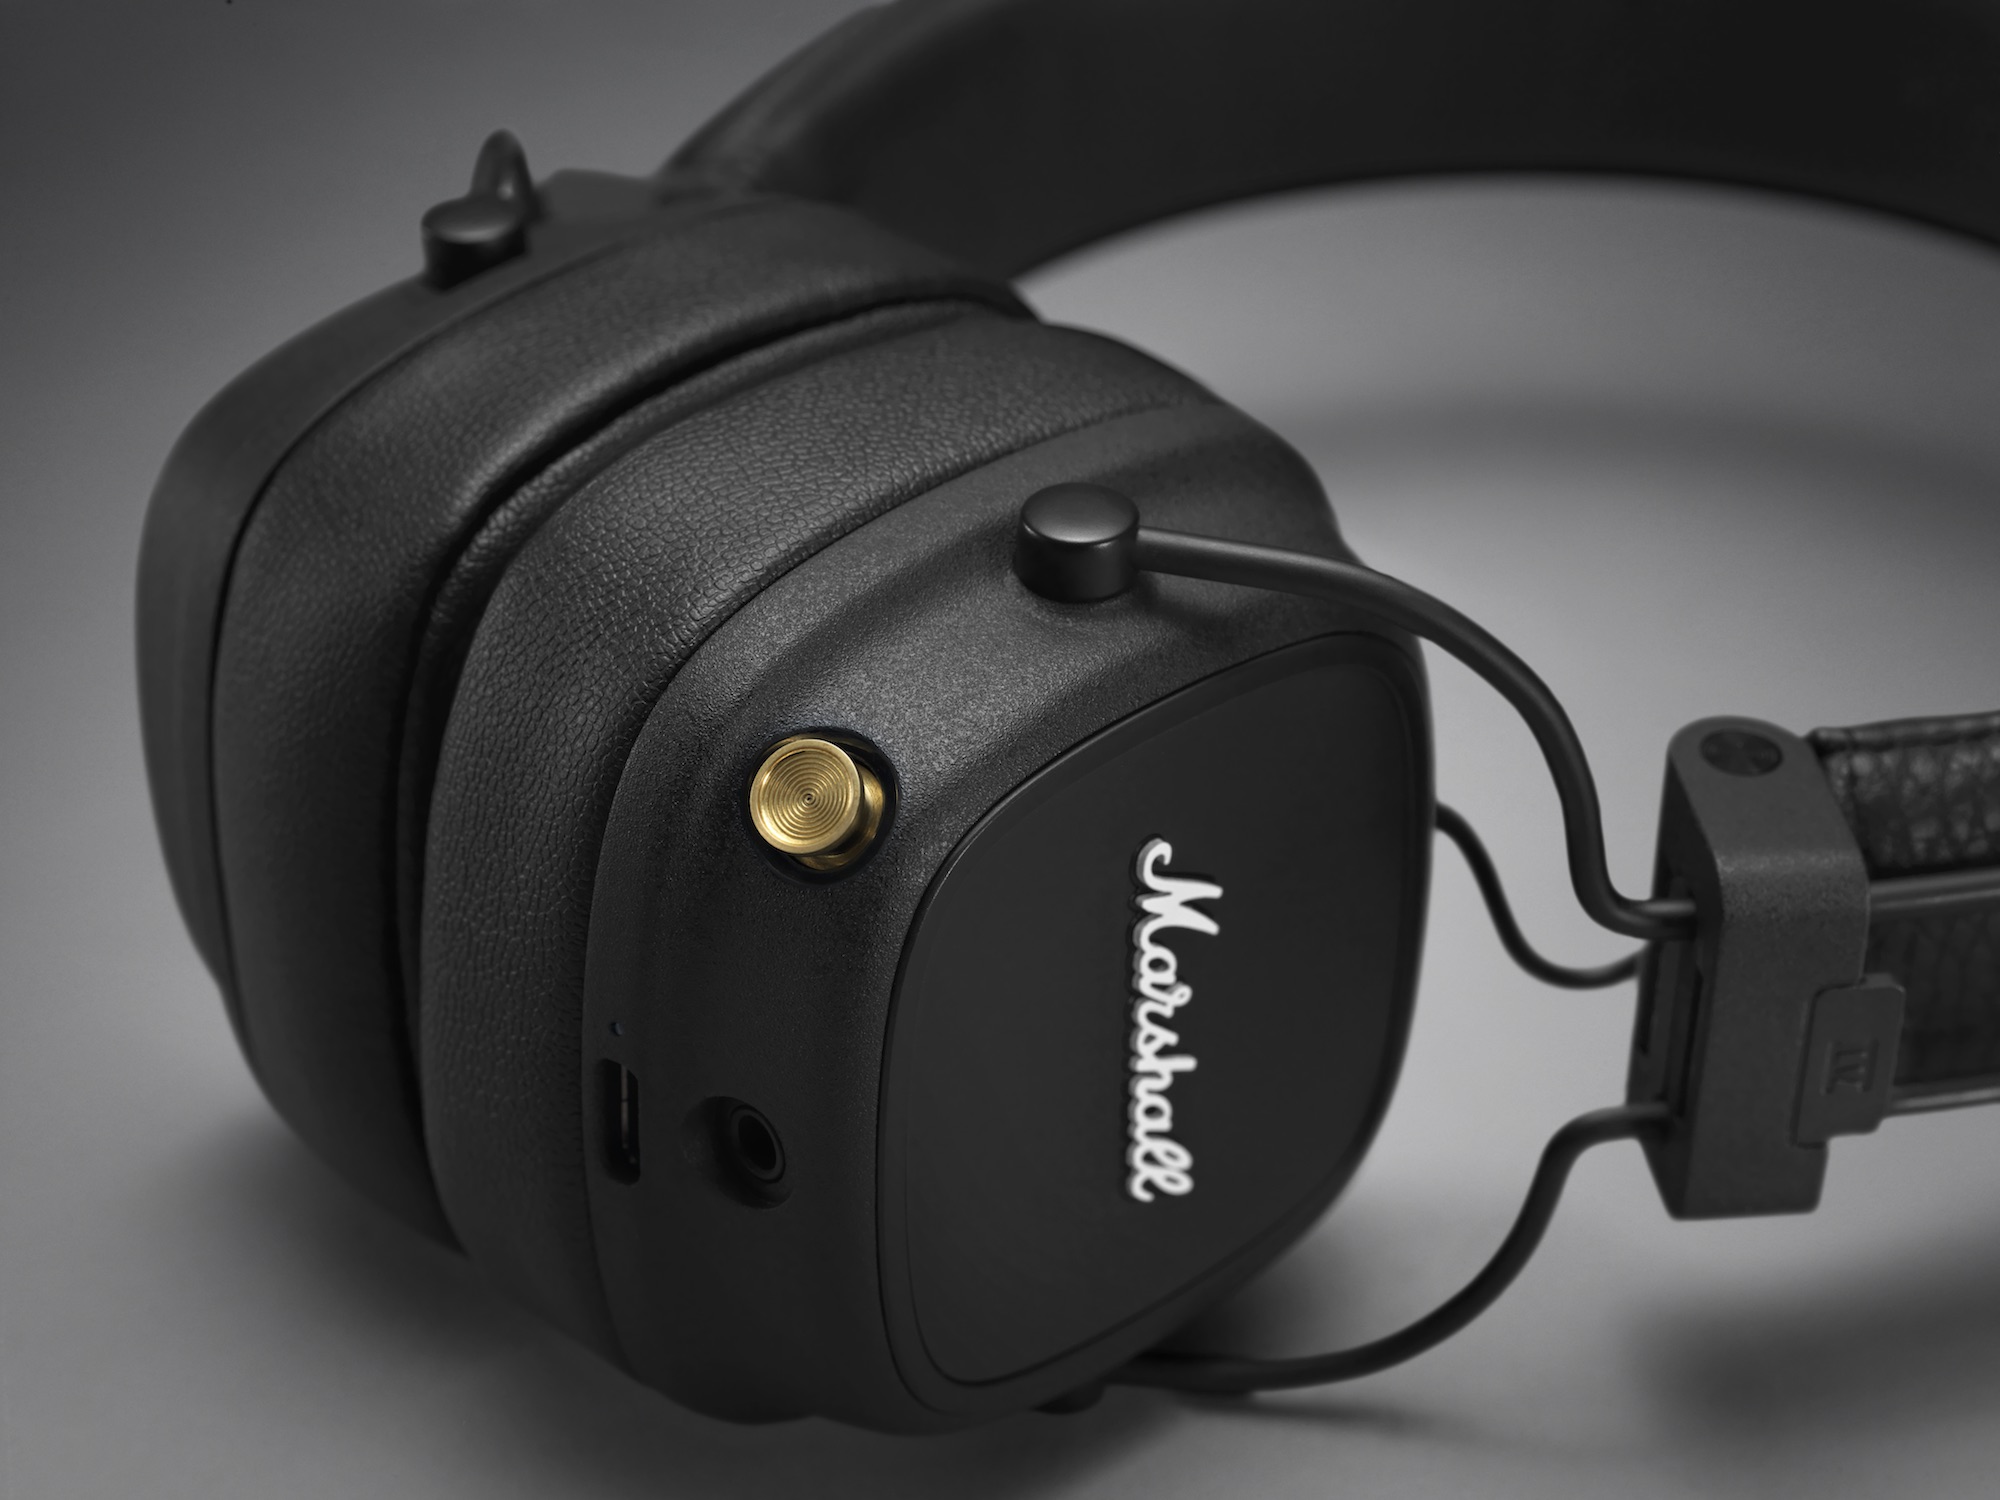 Marshall Major IV Headphones Review: wireless charge, more